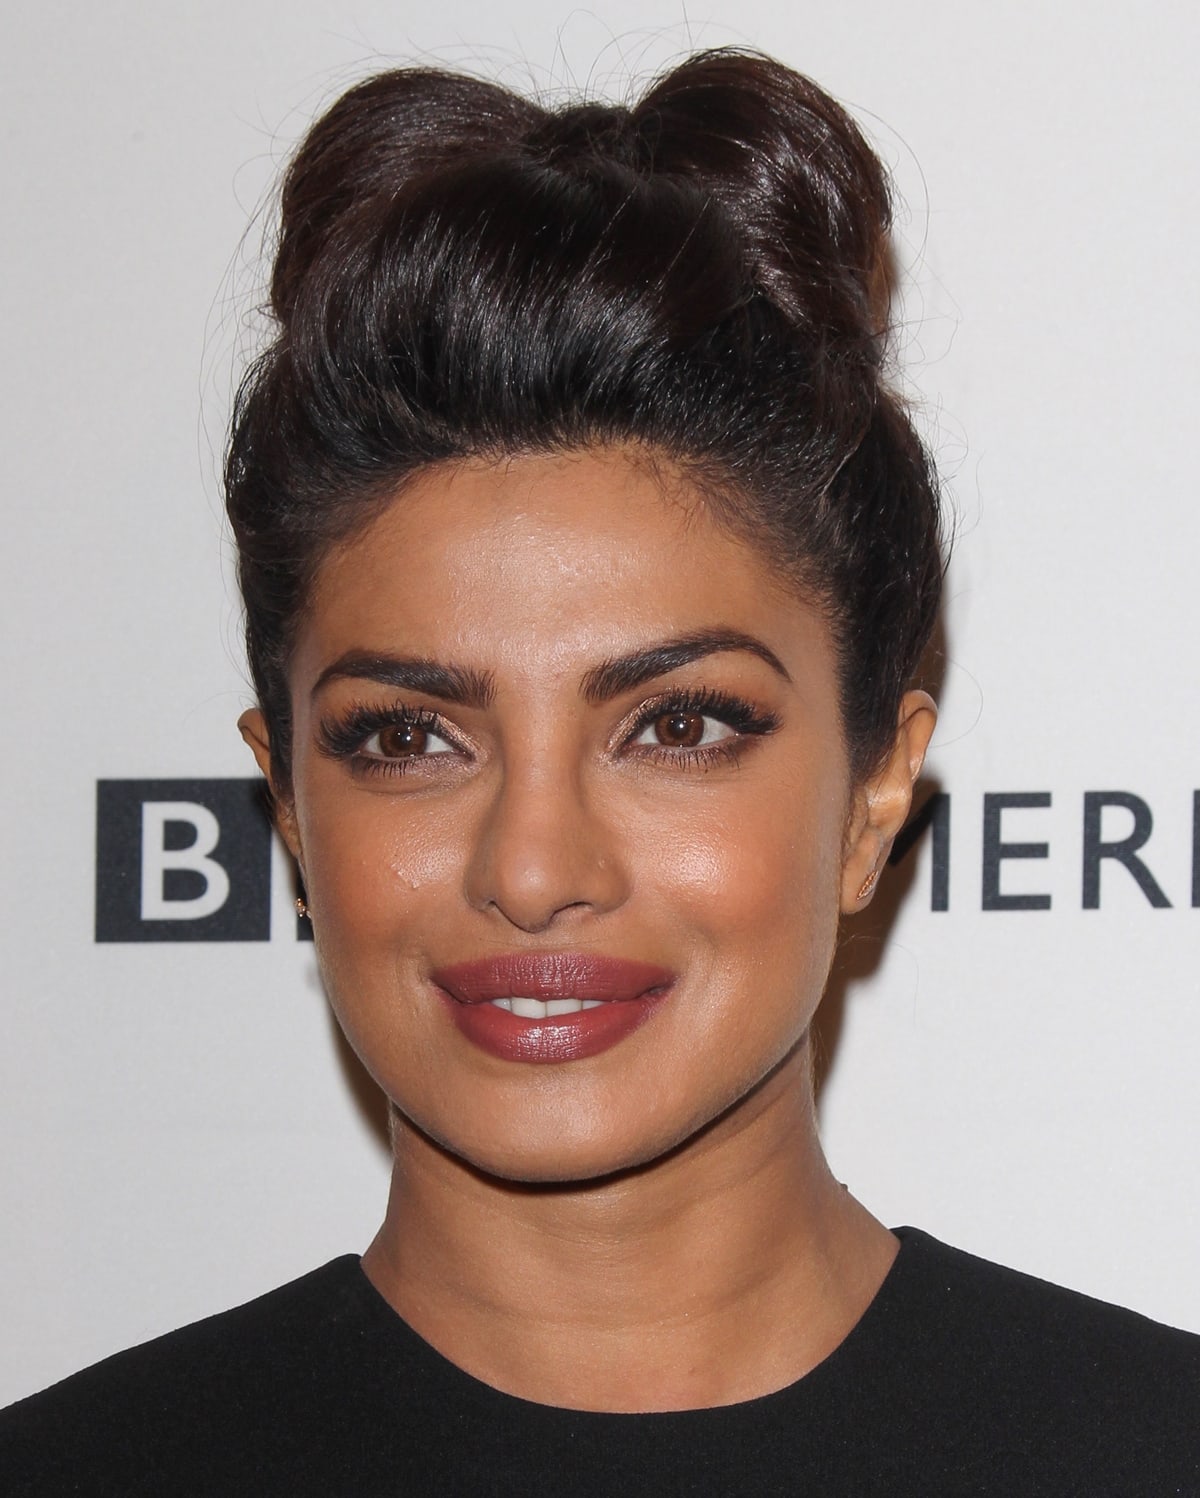 Priyanka Chopra has opened up about botched plastic surgery, saying her doctor shaved the bridge of her nose